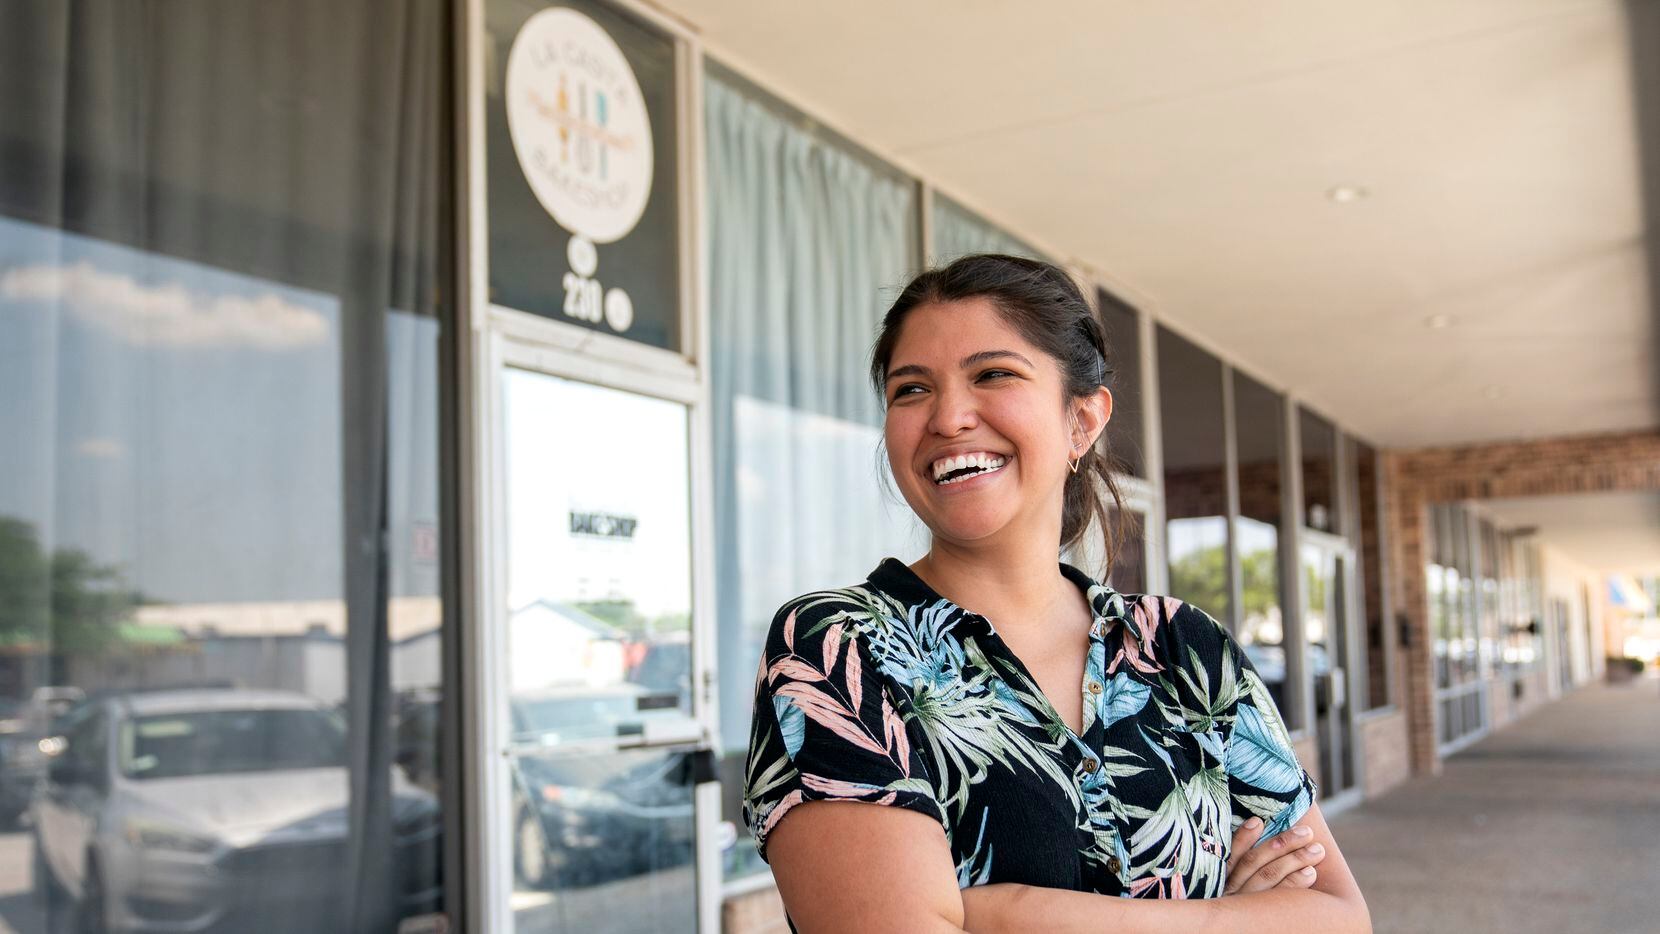 Maricsa Trejo, owner and pastry chef at La Casita Bakeshop, poses for a portrait outside her...